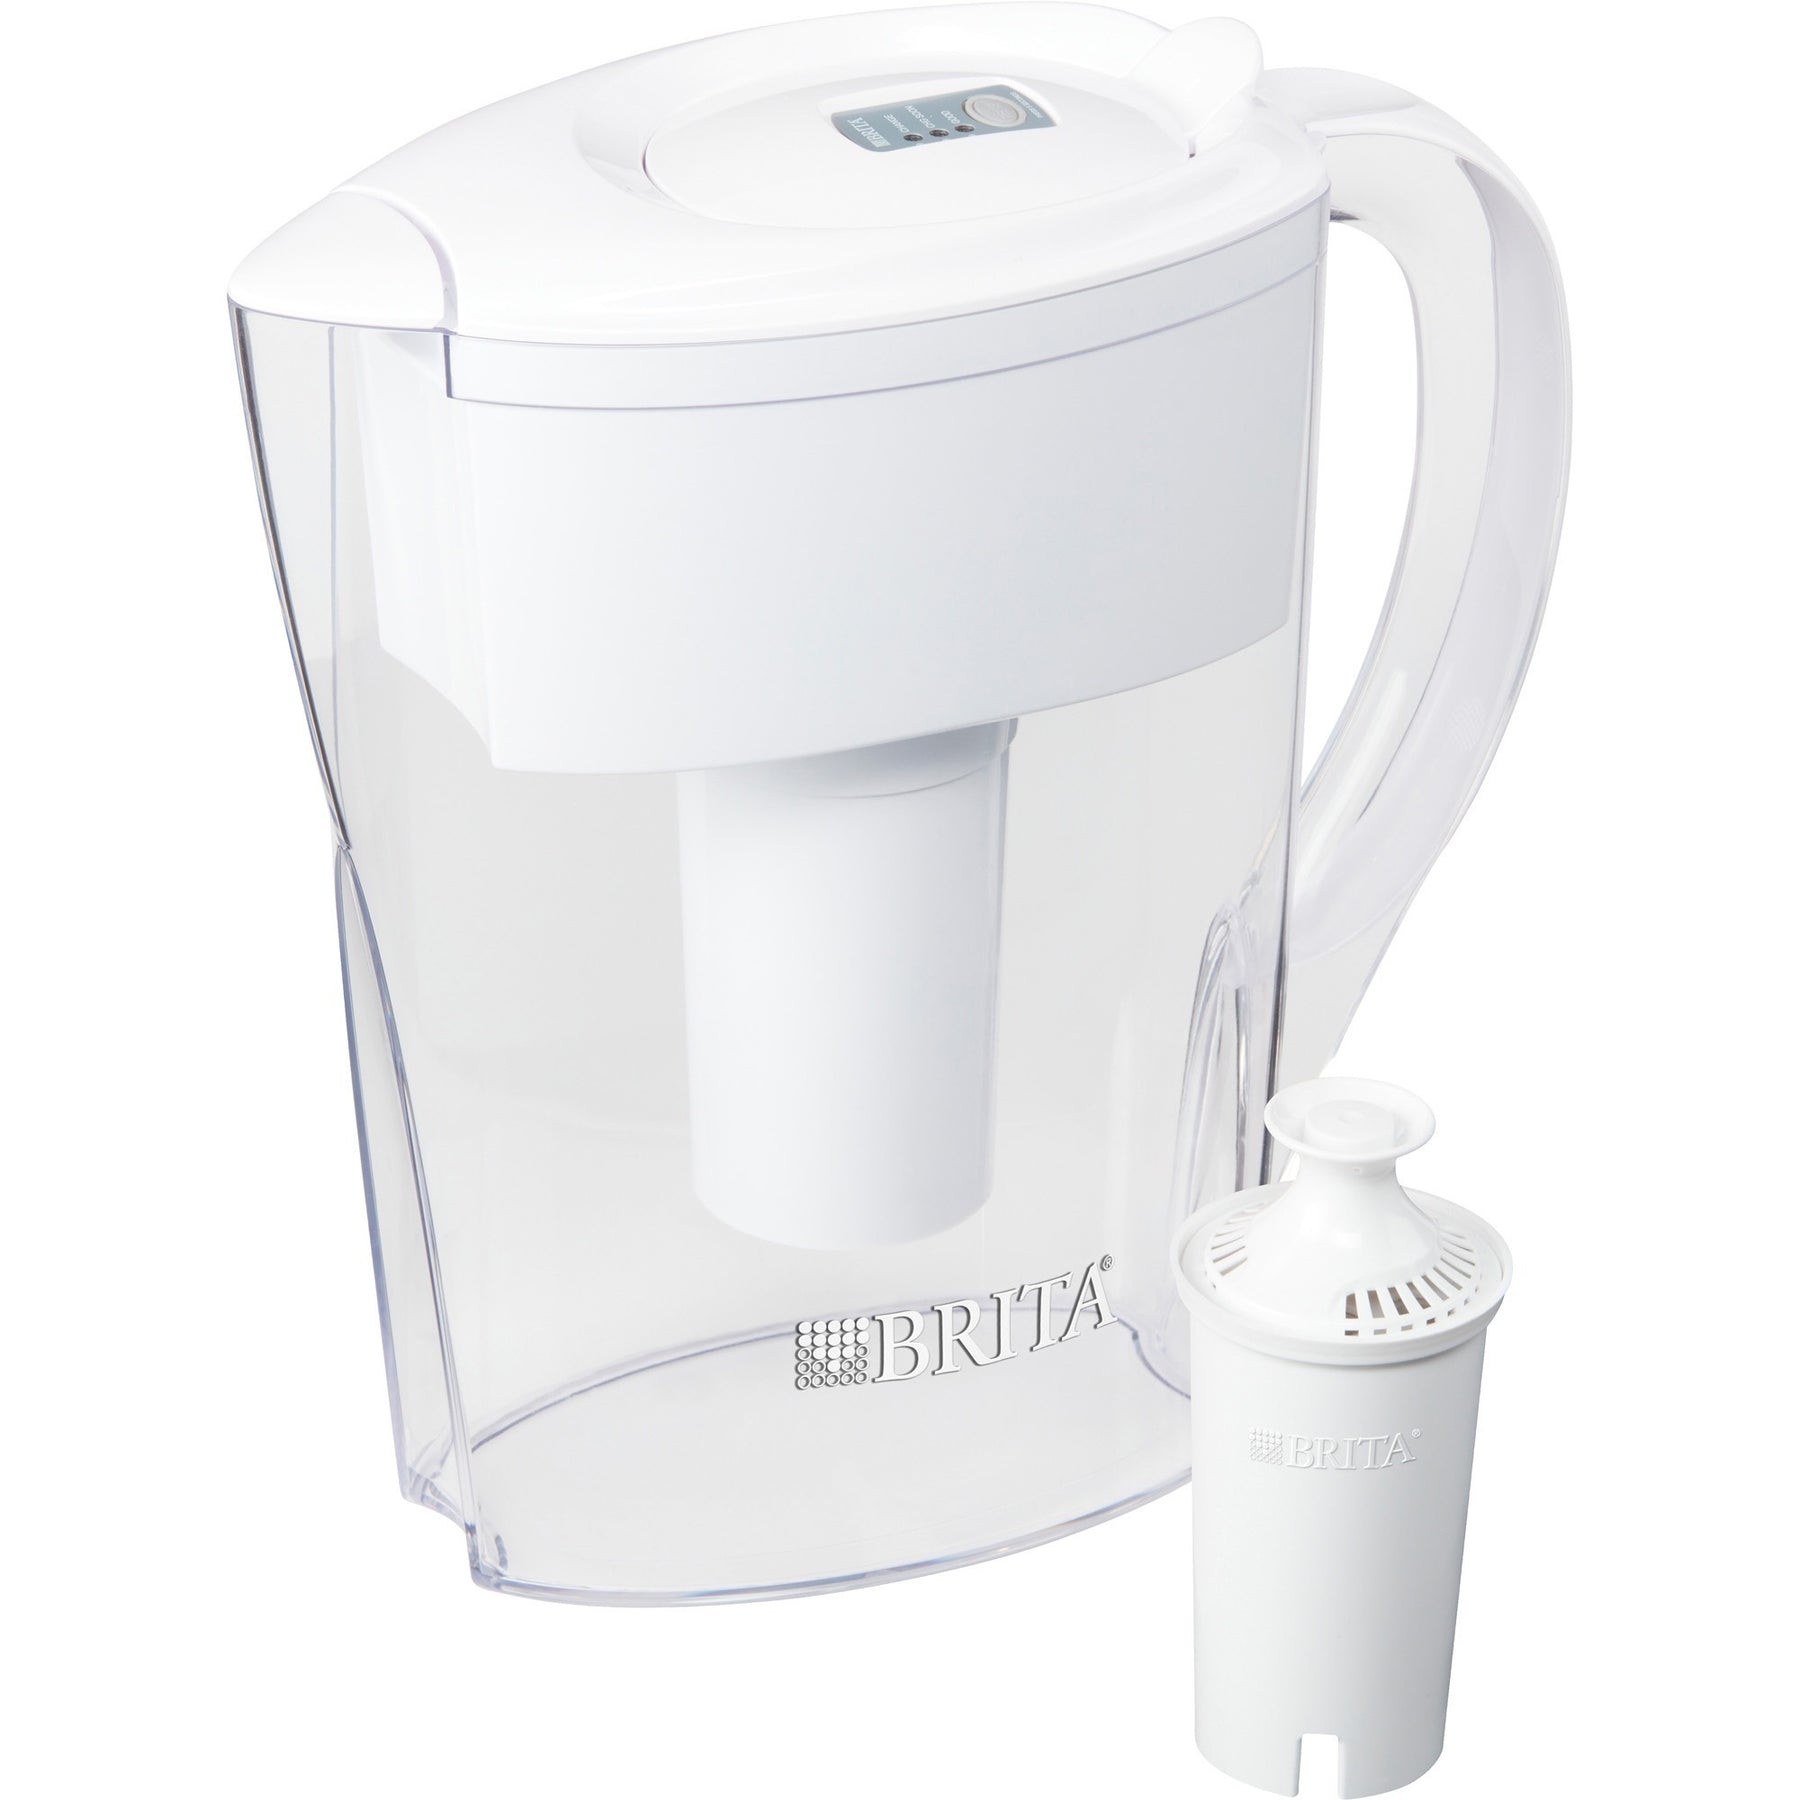 Brita 35566 Space Saver Water Filtration Pitcher, 6 Cup, 48oz, Includes 1 Filter